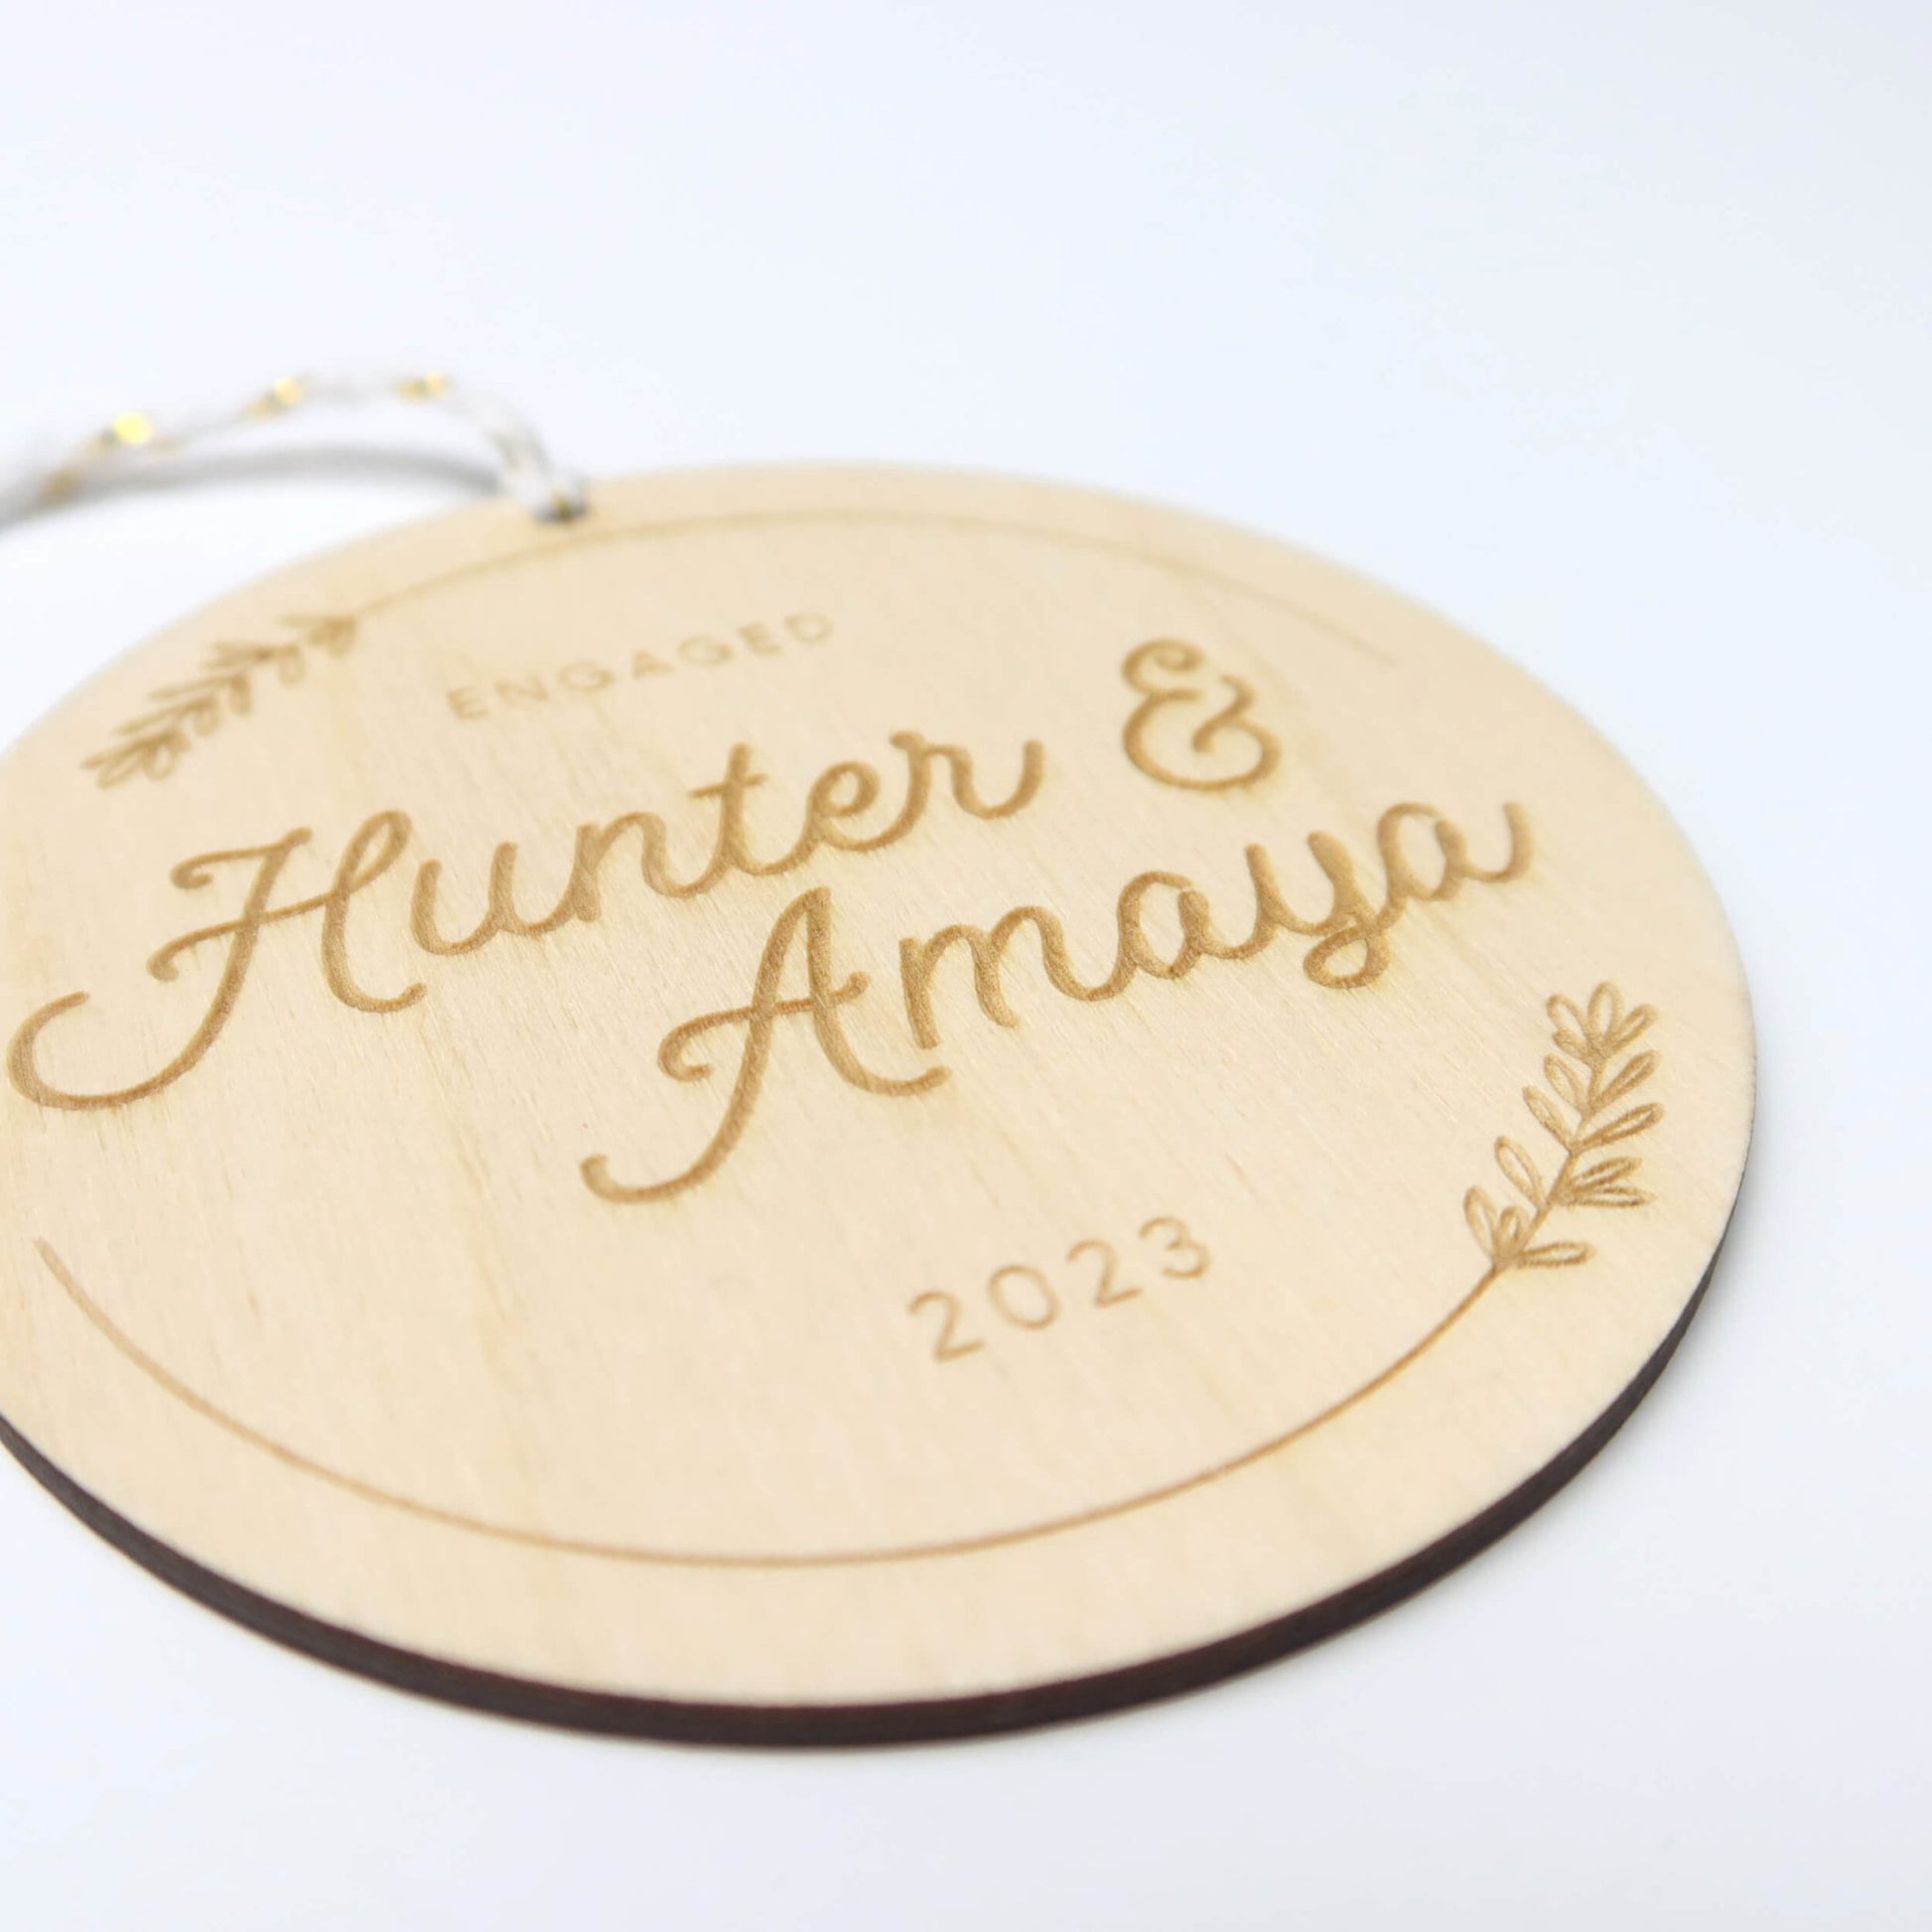 Personalized Engagement Ornament - Holiday Ornaments - Moon Rock Prints